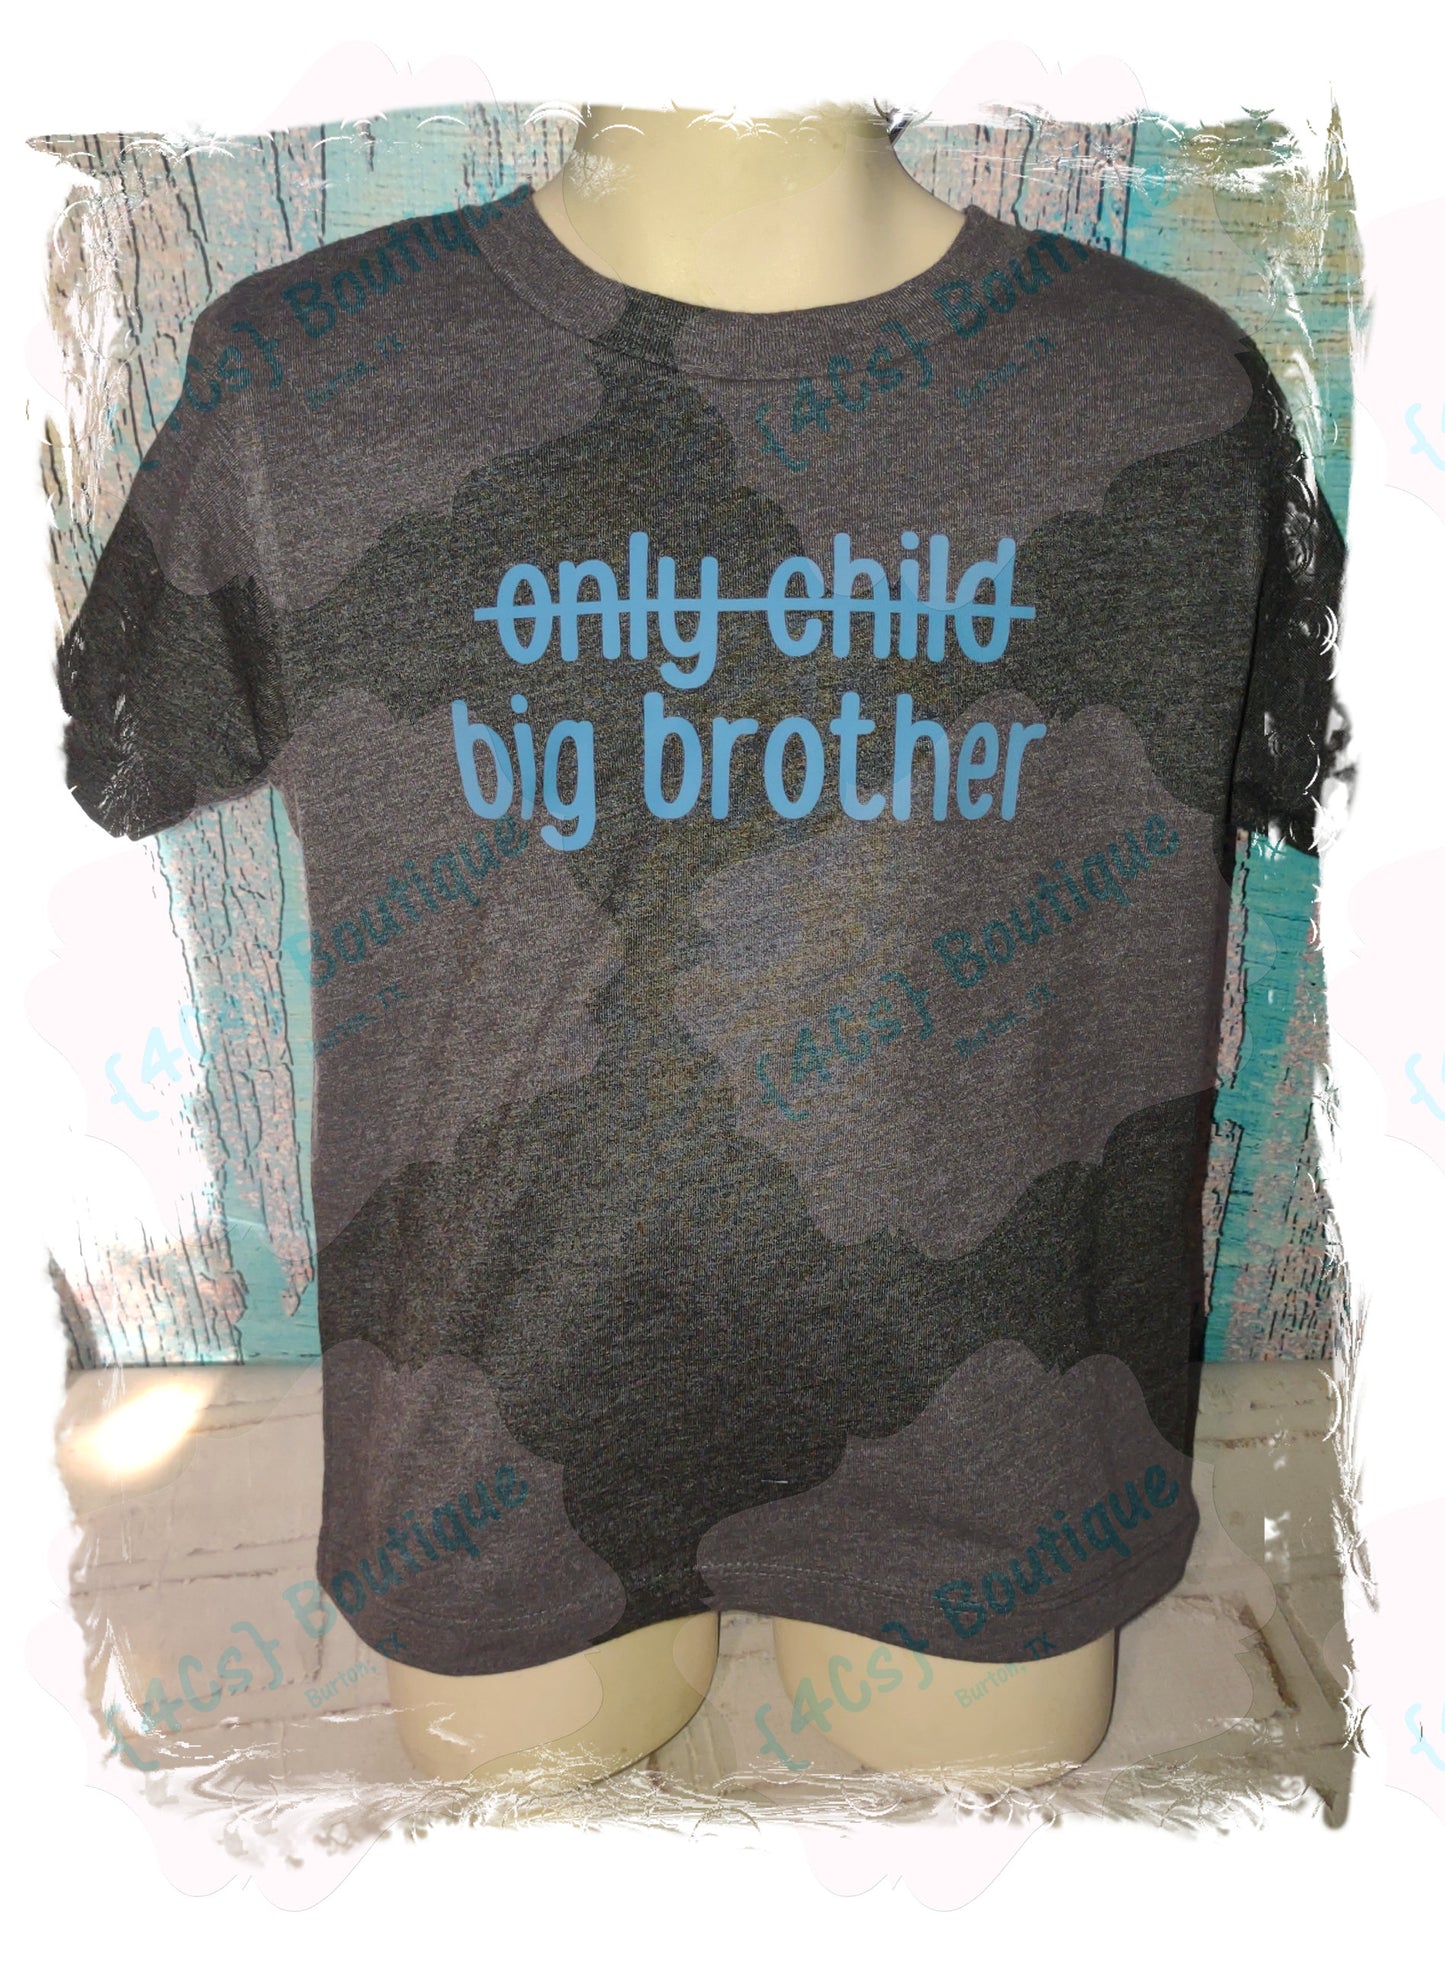 Only Child/Big Brother Kids Shirt